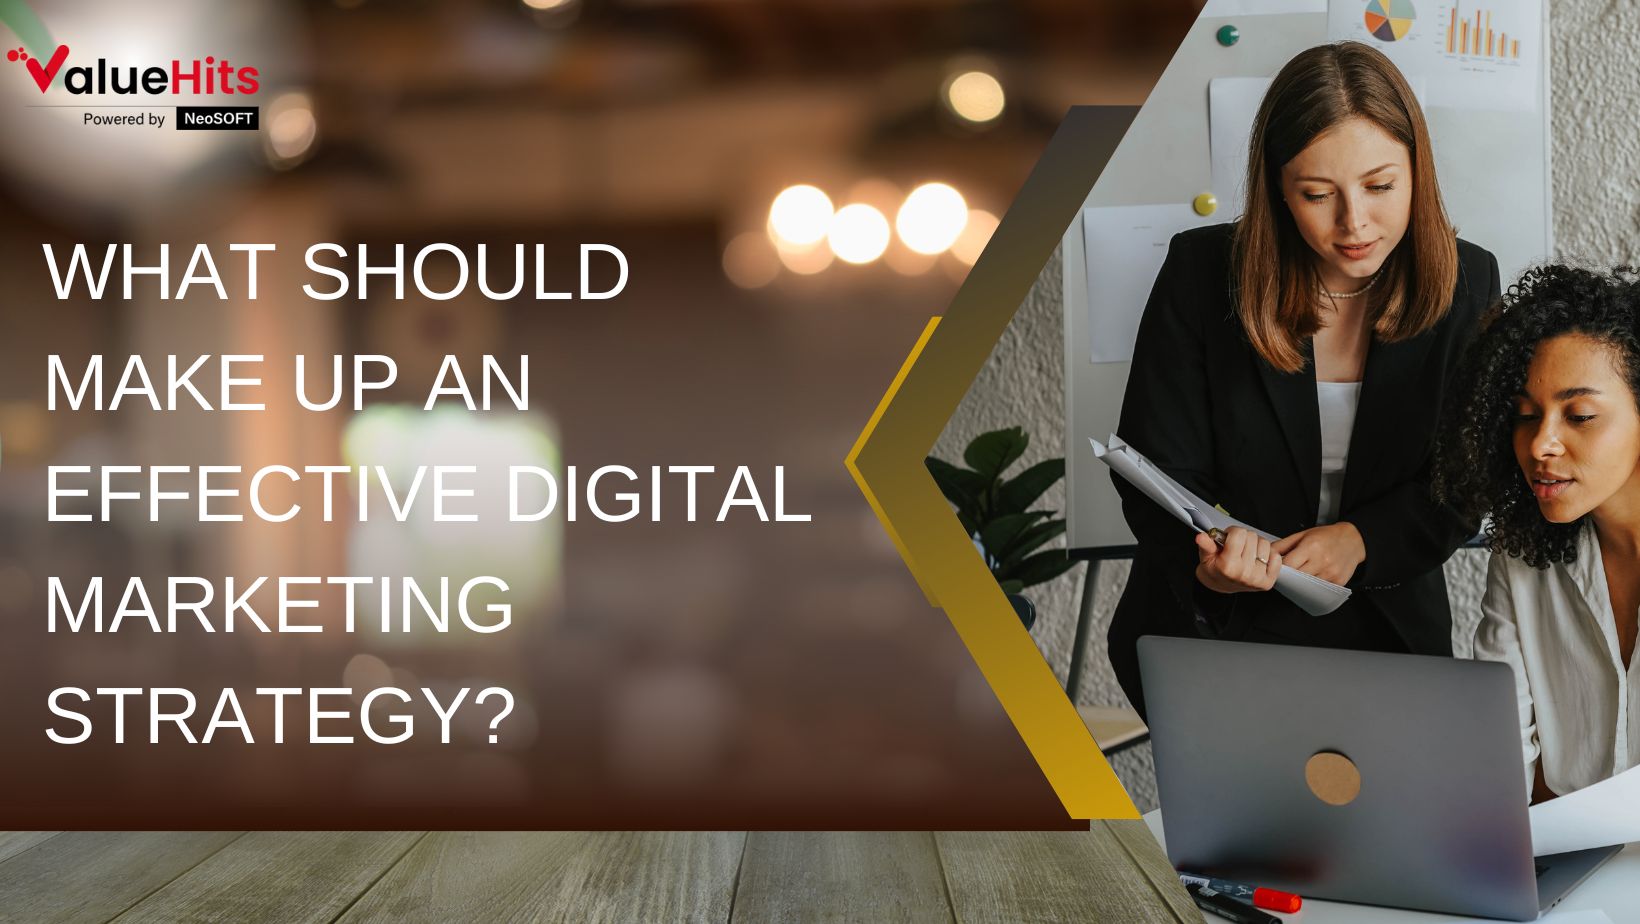 What Should Make Up an Effective Digital Marketing Strategy?